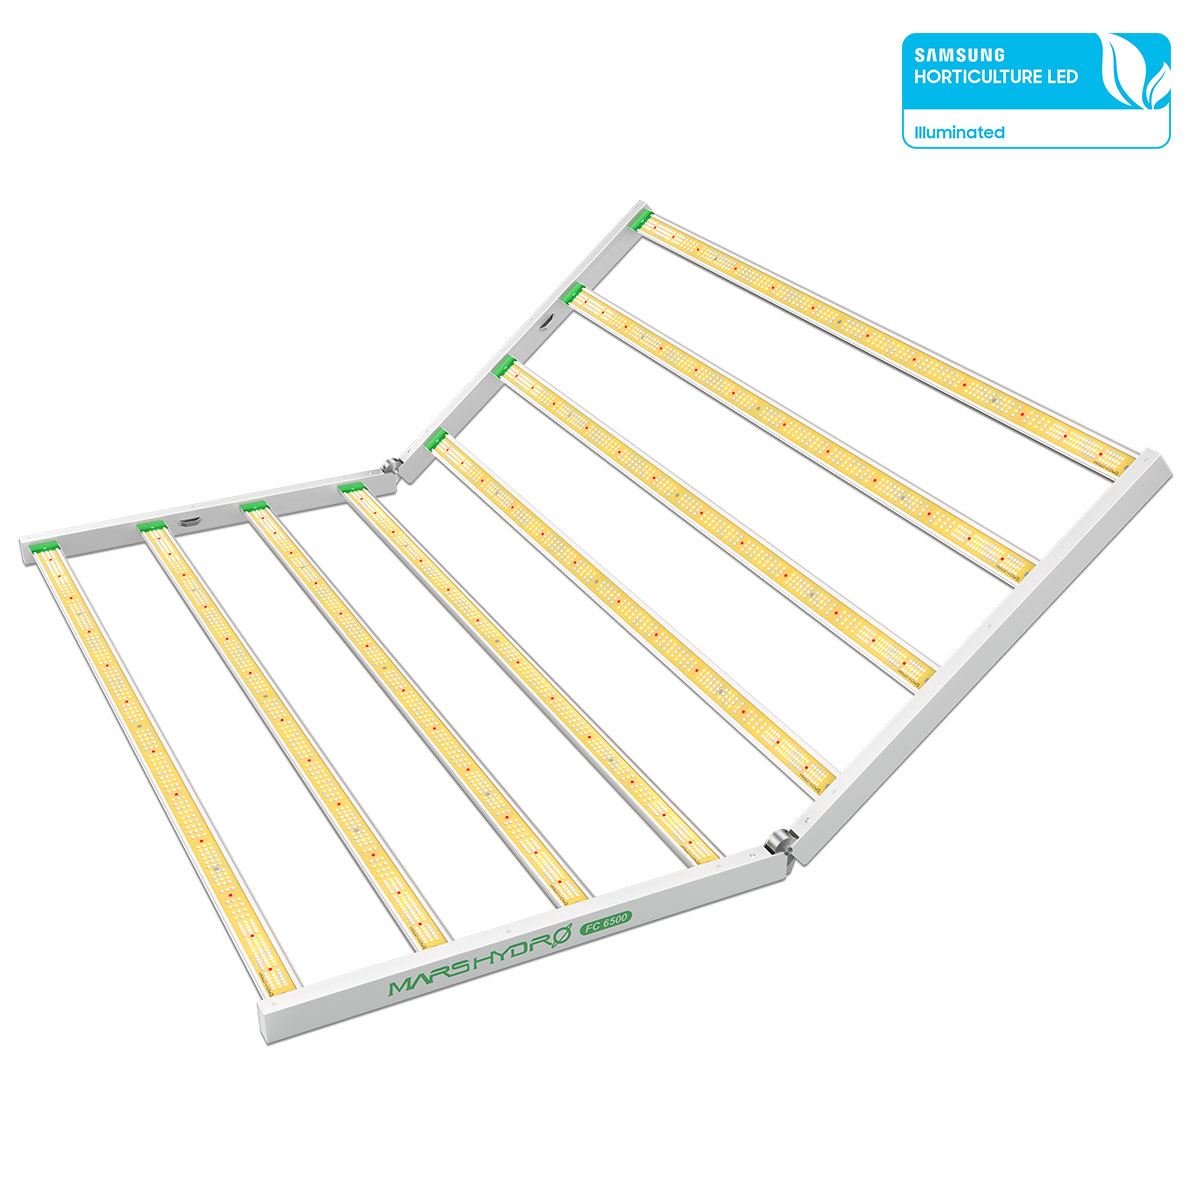 Applied as large multi-strip LED grow lights for large-scale commercial cultivation and high-quality home cultivation., FC6500 employs Samsung LM301B chips and a full spectrum light that is rich in red and blue and adopts a uniform photon distribution to maintain an even PPID and optimal PPF across the canopy.